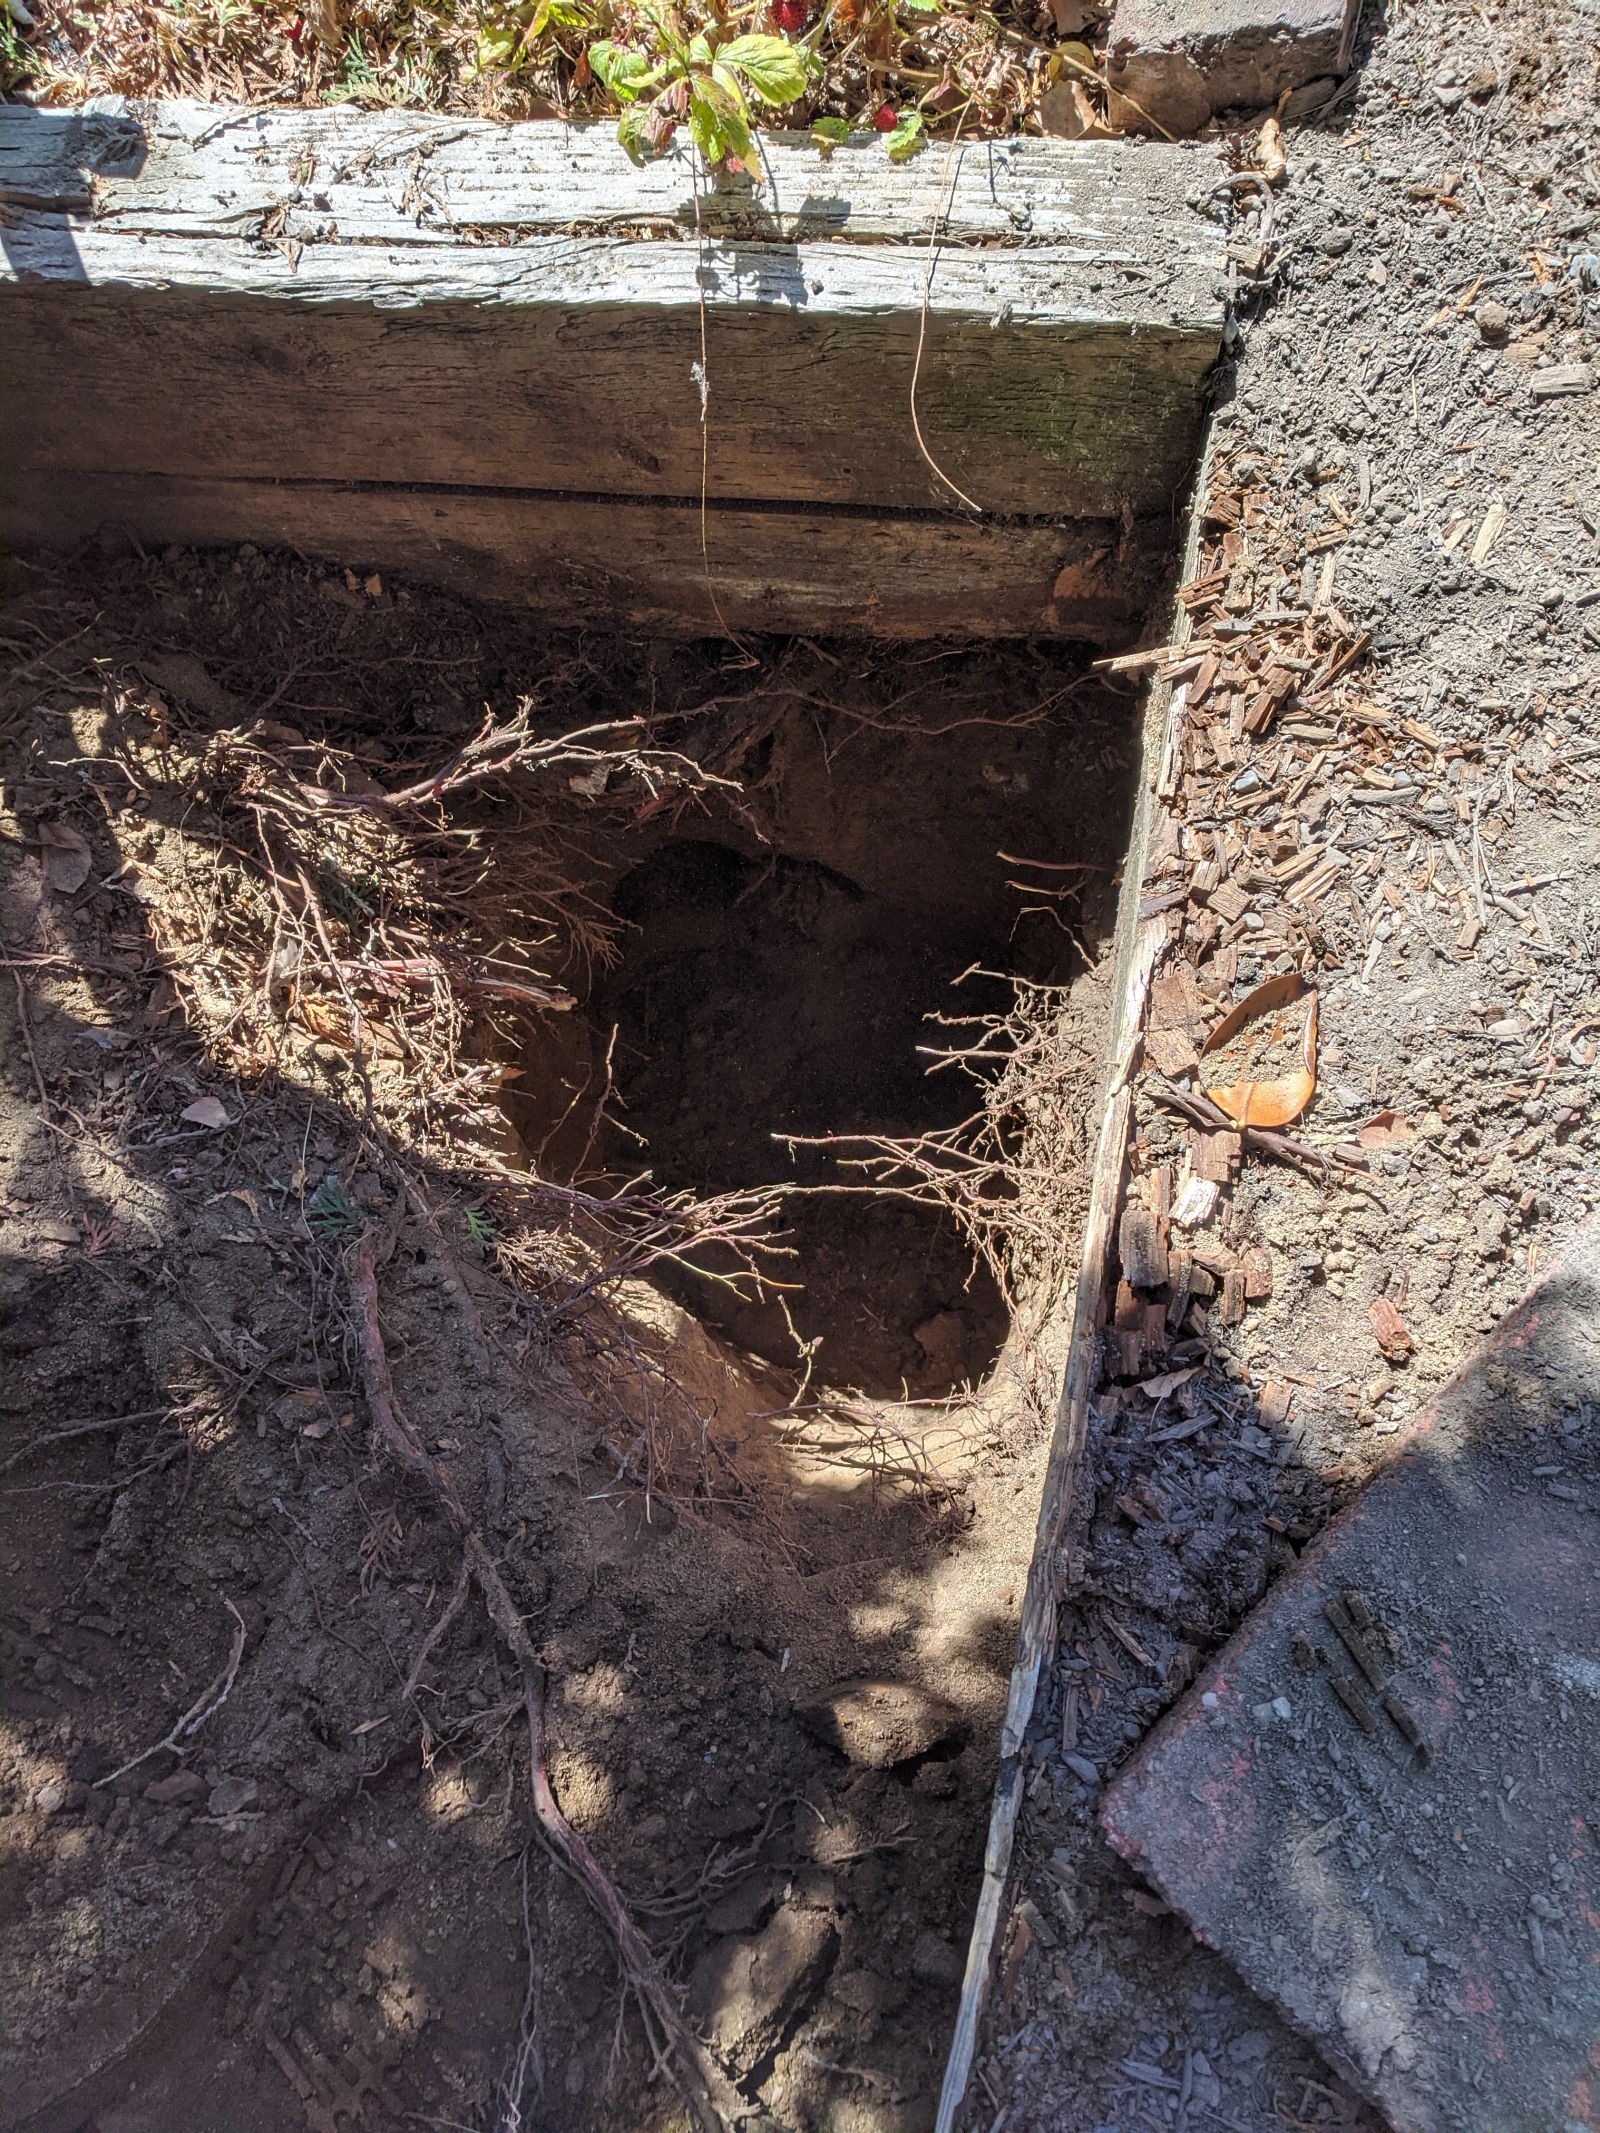 Now you see the problem, yes? I had to dig a HUGE hole just to get to the old concrete, unless I wanted to break it up with a hammer (no). So now we have a hole that’s at least double the width of what we need.